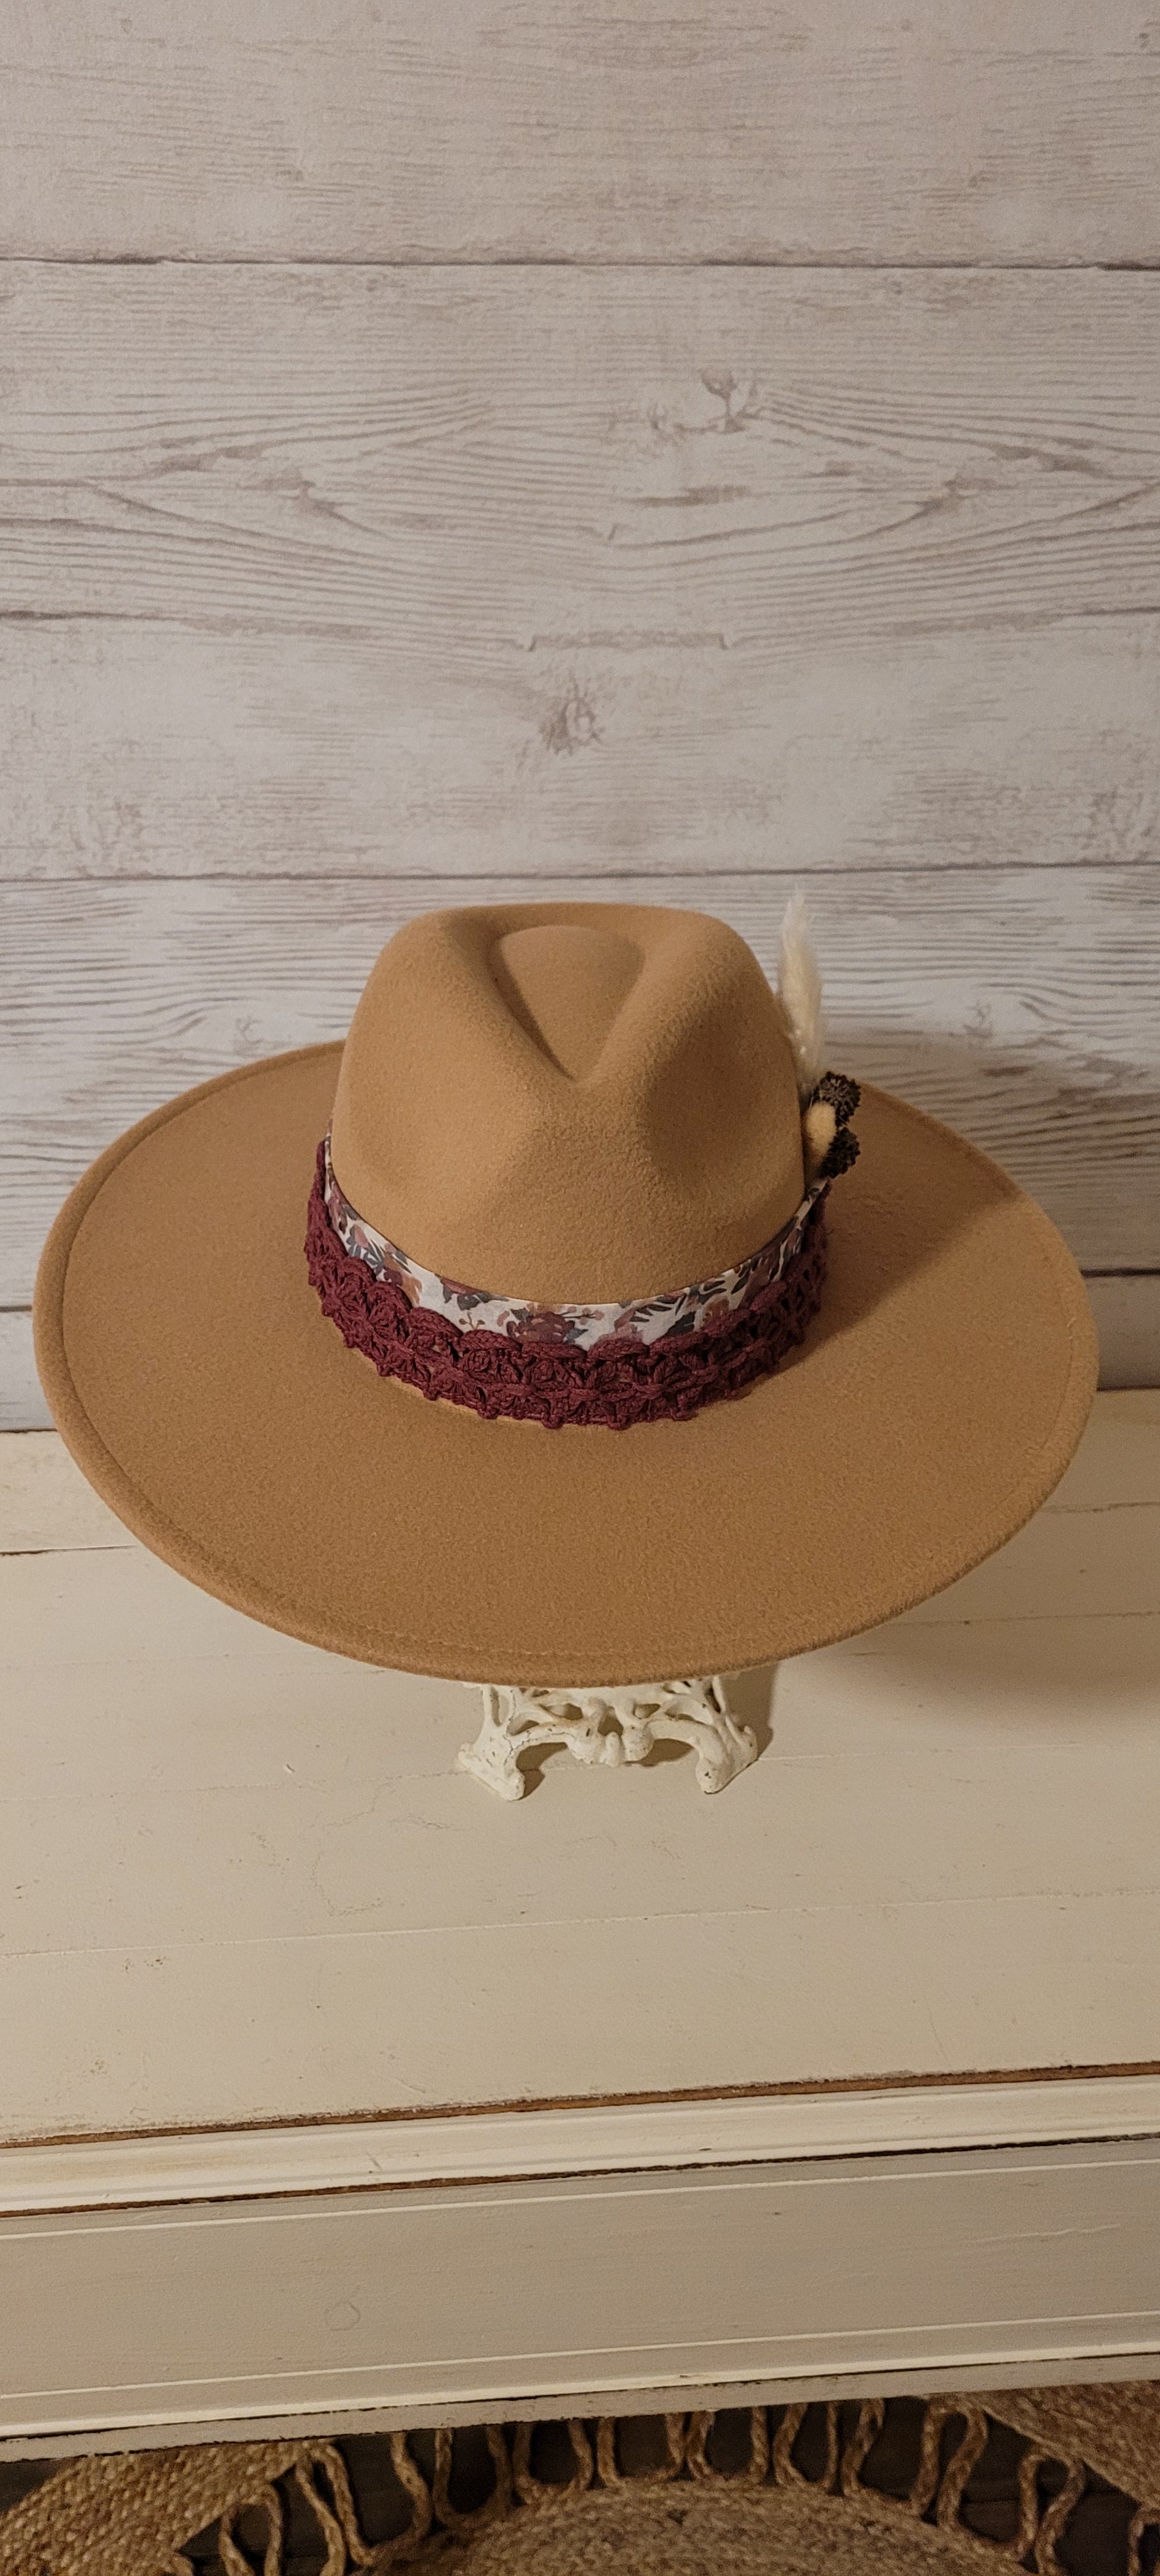 Sheer floral ribbon, lace ribbon, pampas, cattails, pine cones Felt hat Flat brim 100% polyester Ribbon drawstring for hat size adjustment Head Circumference: 24" Crown Height: 5" Brim Length: 15.75" Brim Width: 14.5" Branded & numbered inside crown Custom designed by Kayla